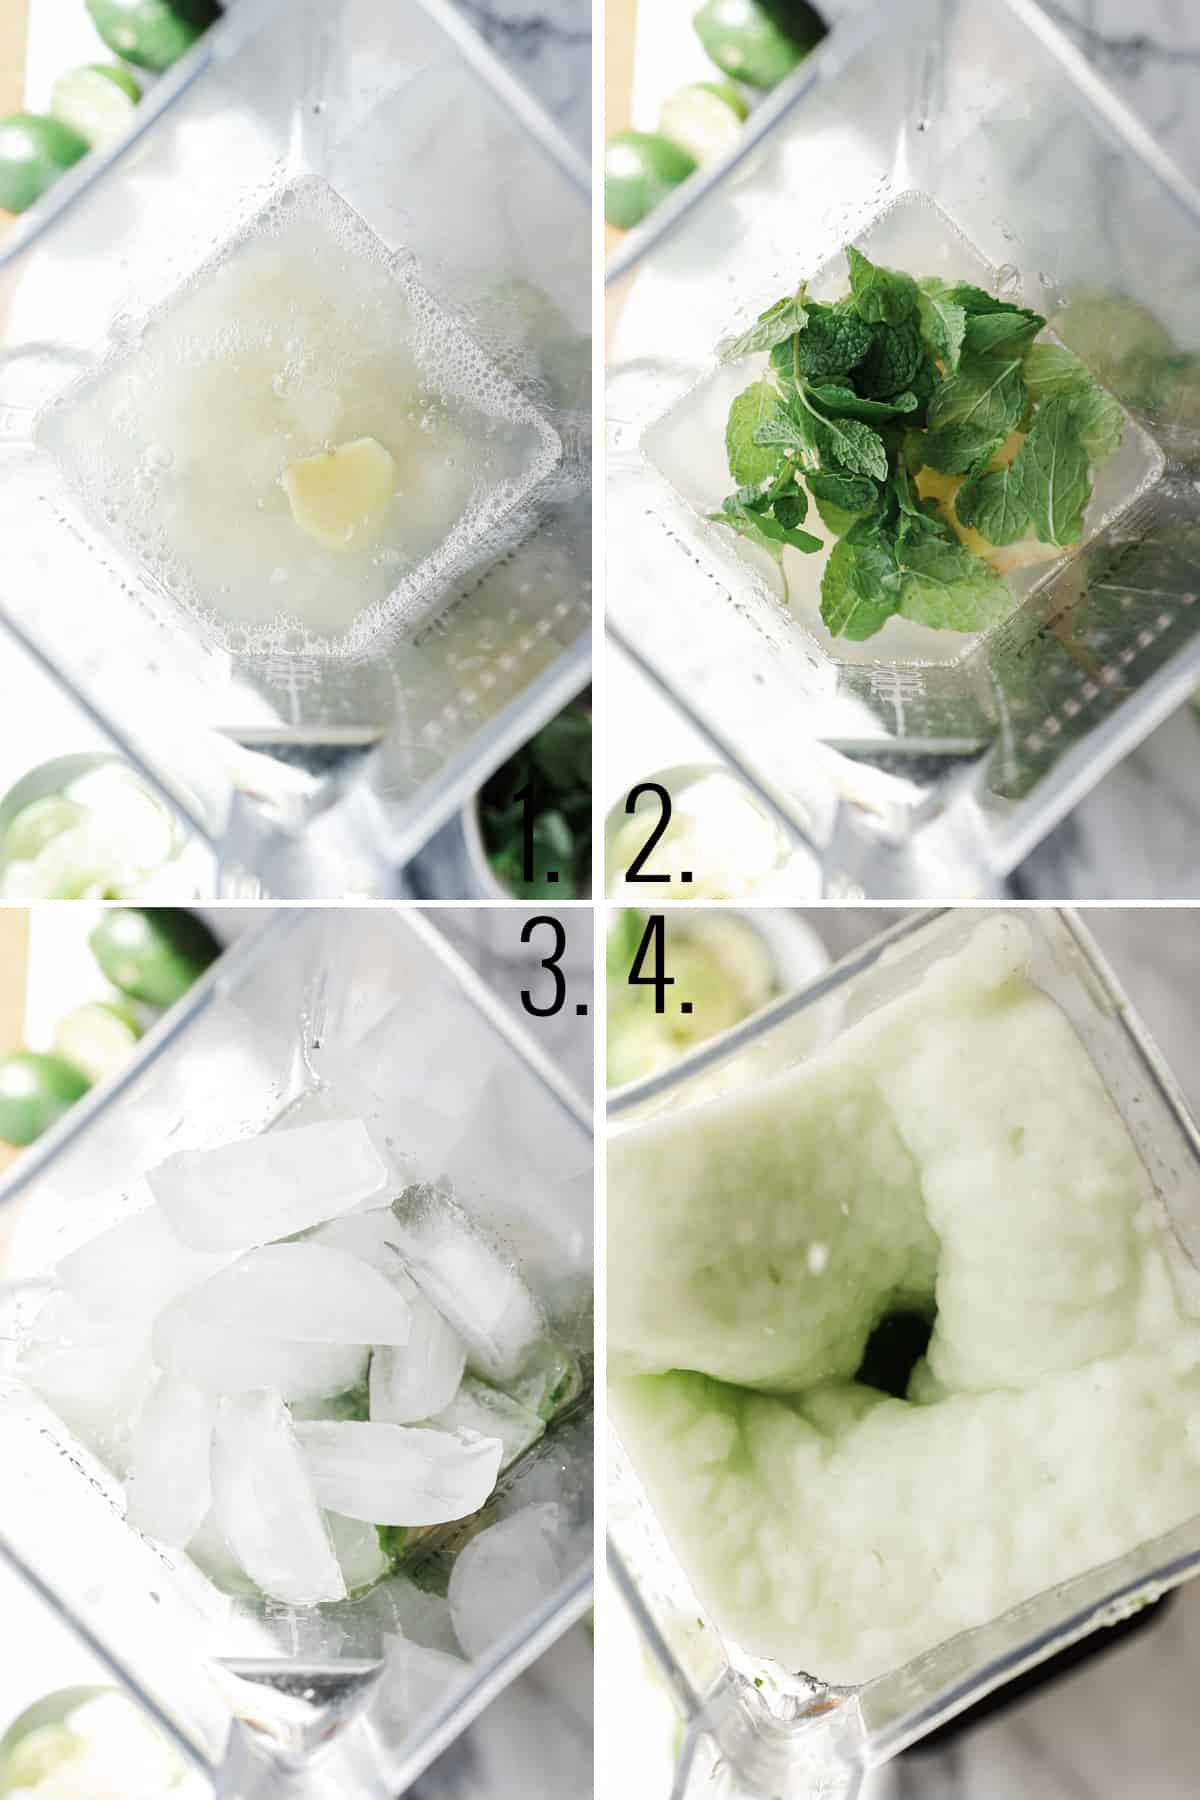 Four photos showing adding ingredients to a blender and then blending into a slushy.